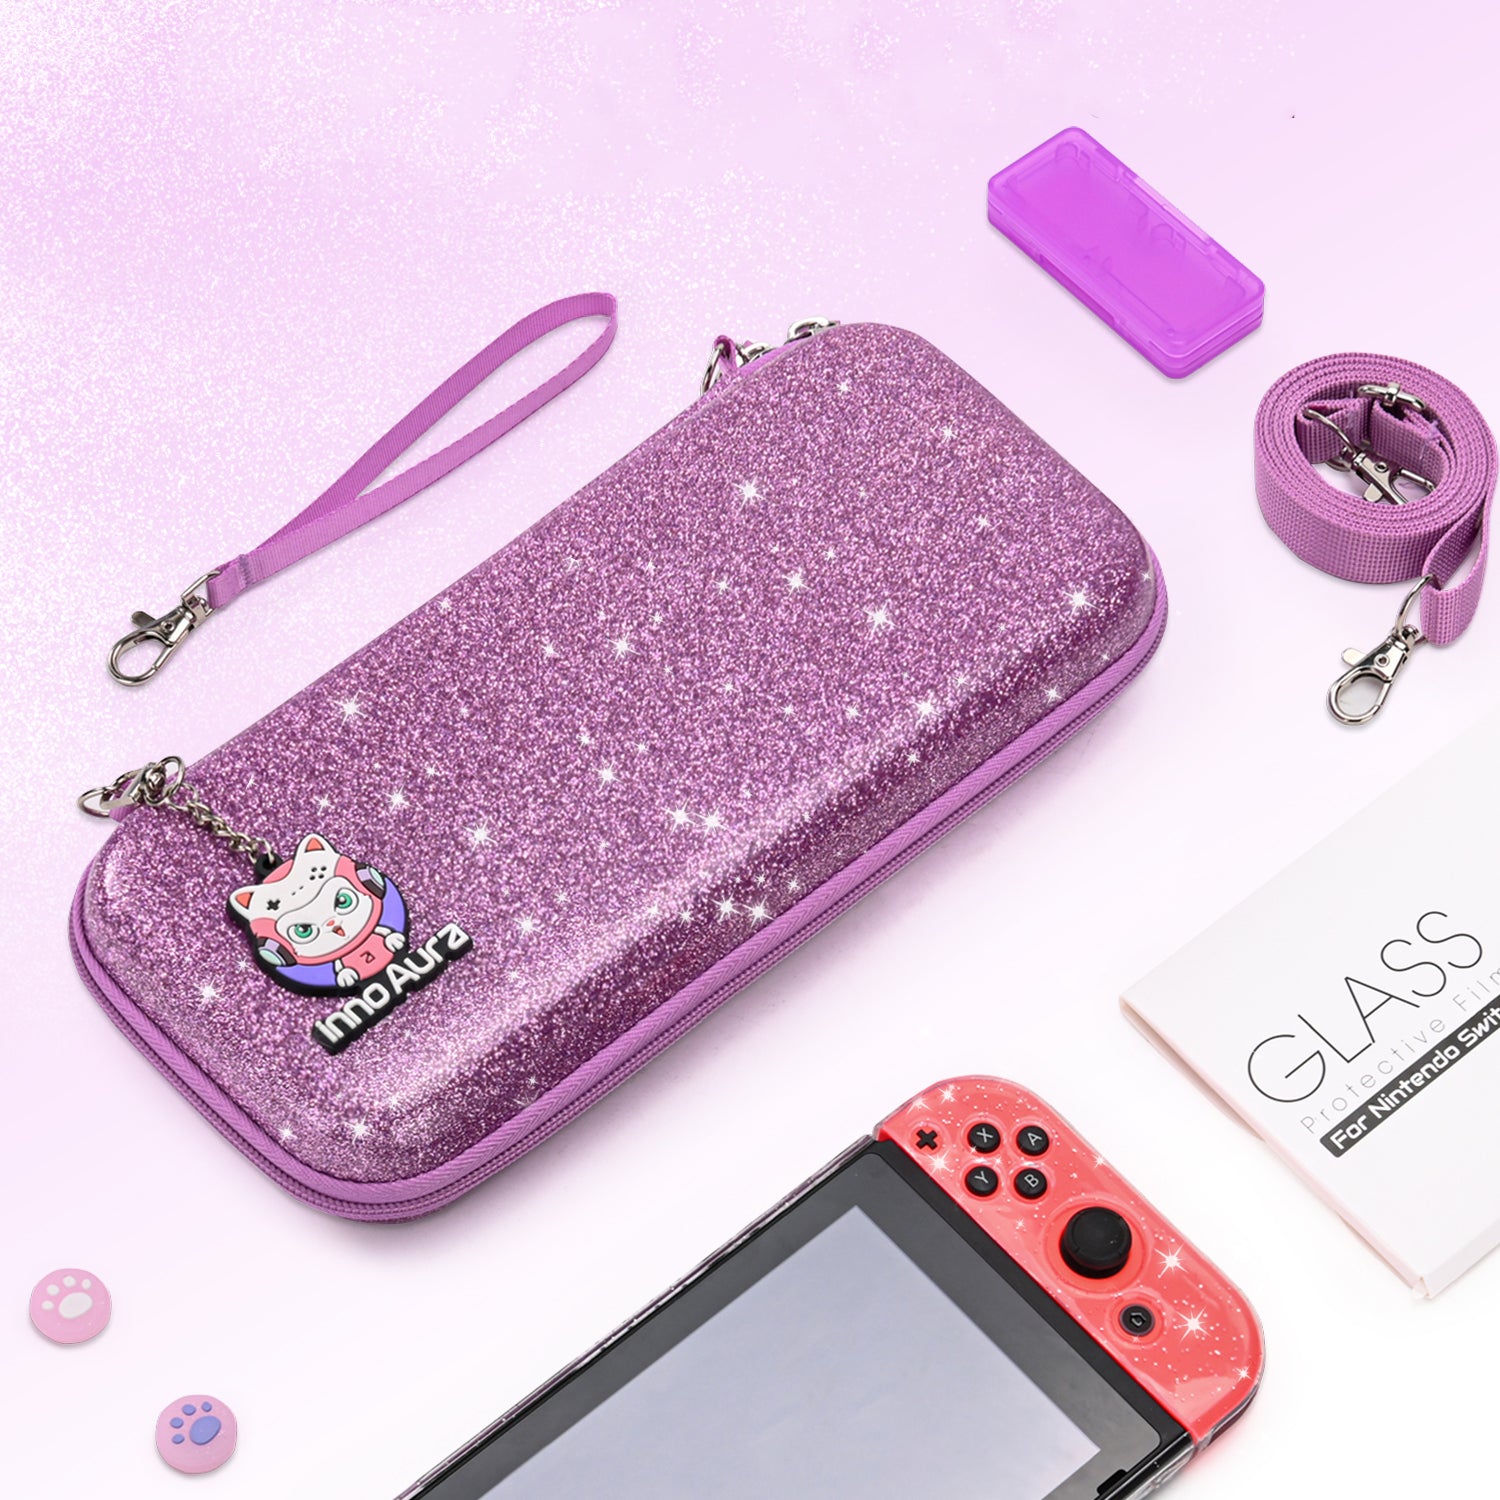 innoAura Nintendo Switch Case, Glitter Protective Travel Case for Switch